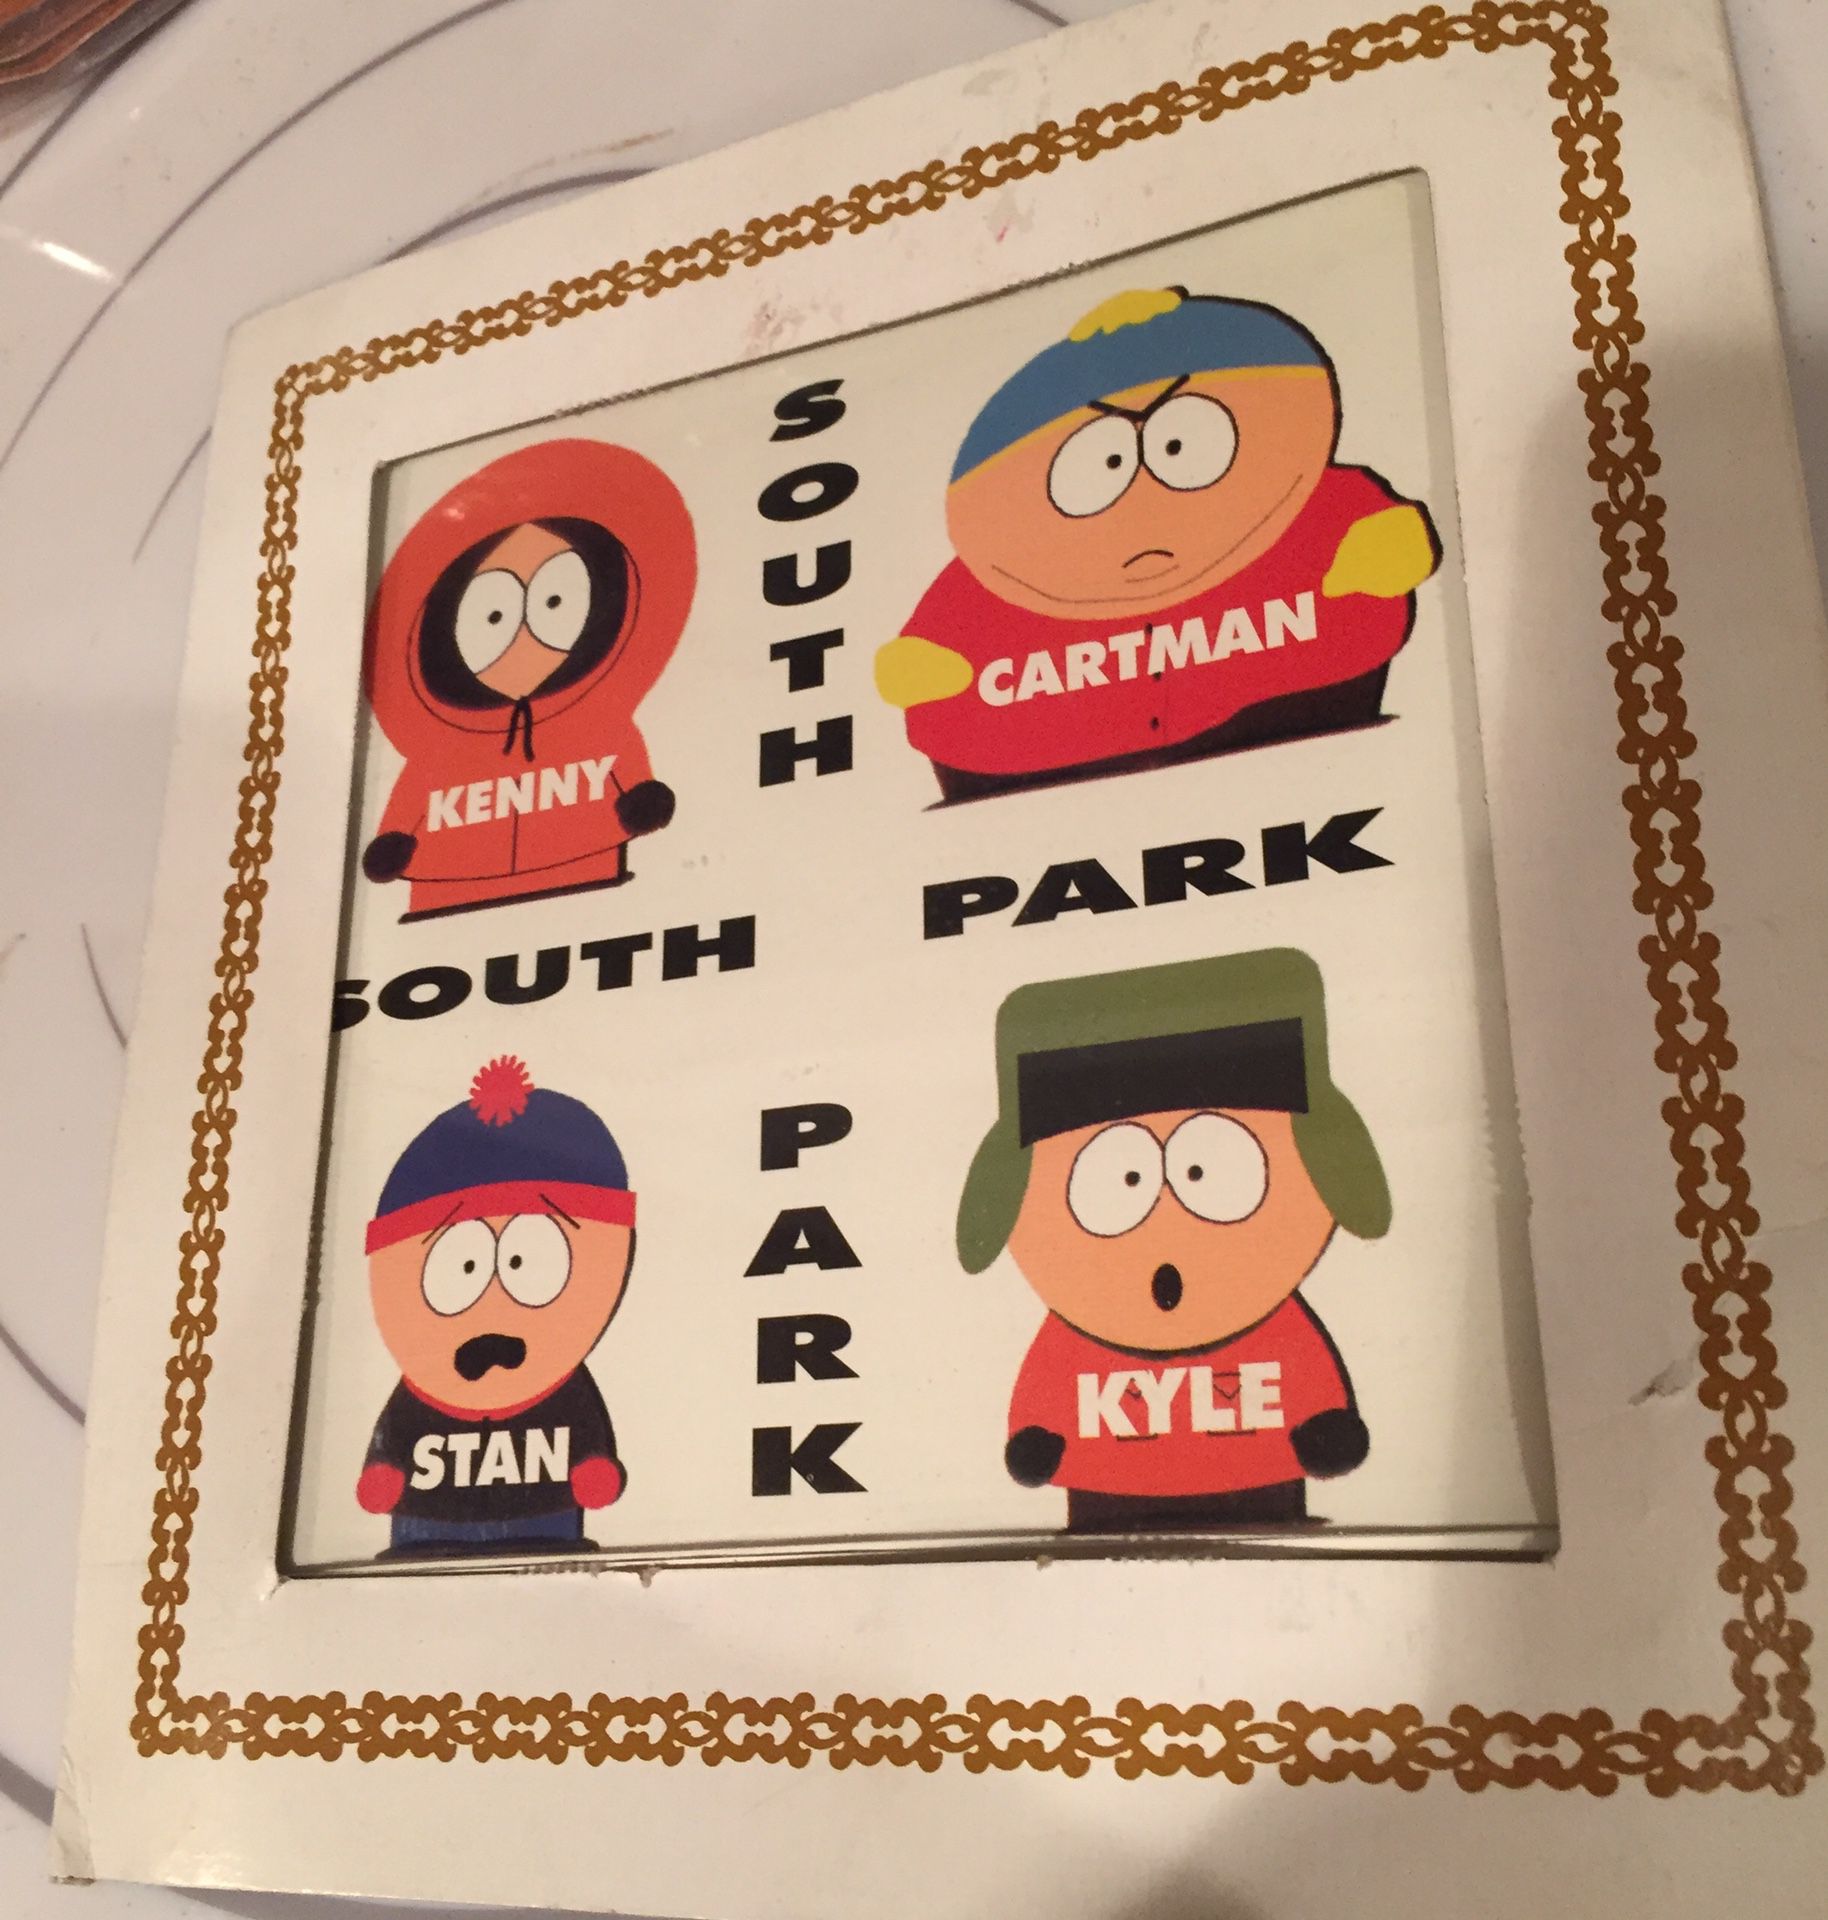 South park poster with glass frame